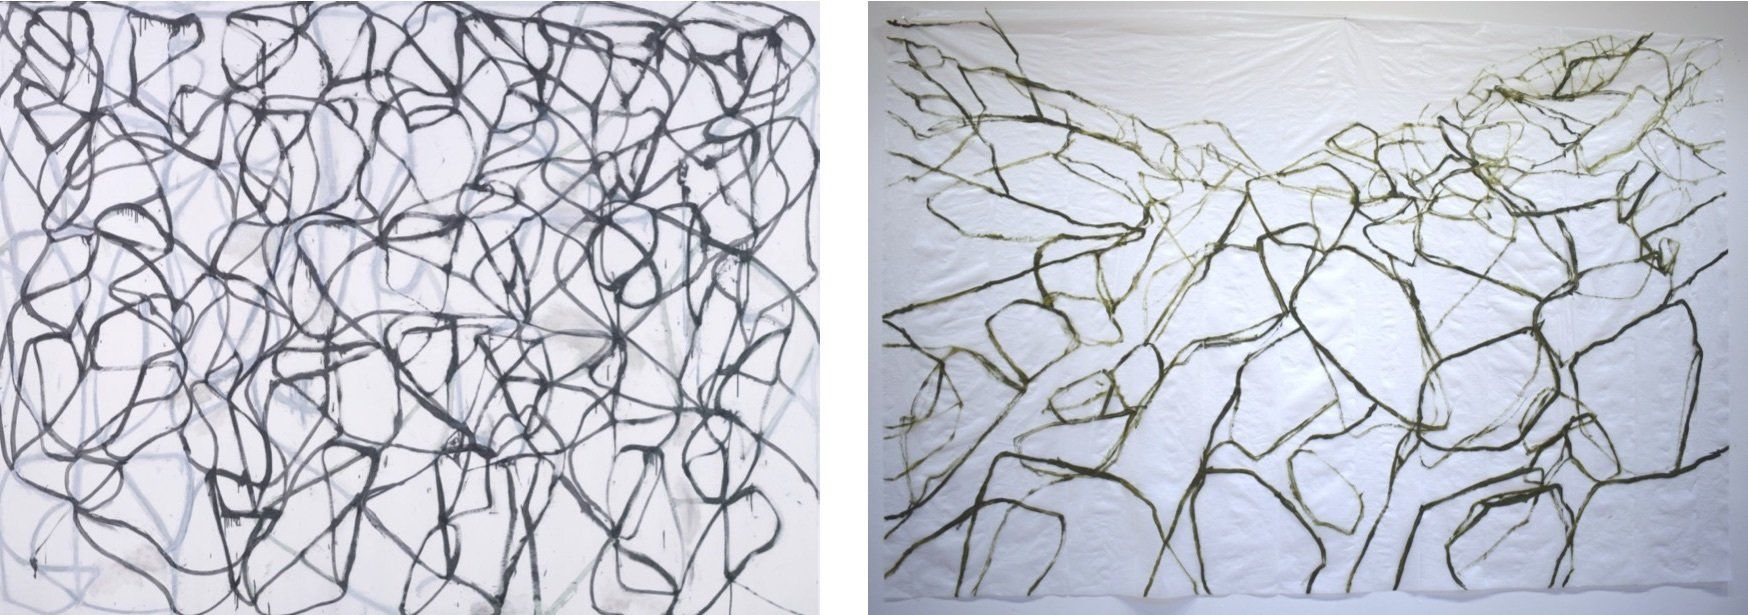 Drawing, Painting, Siobhan McLaughlin, Bryce Marden, Artist, Artwork, Lines